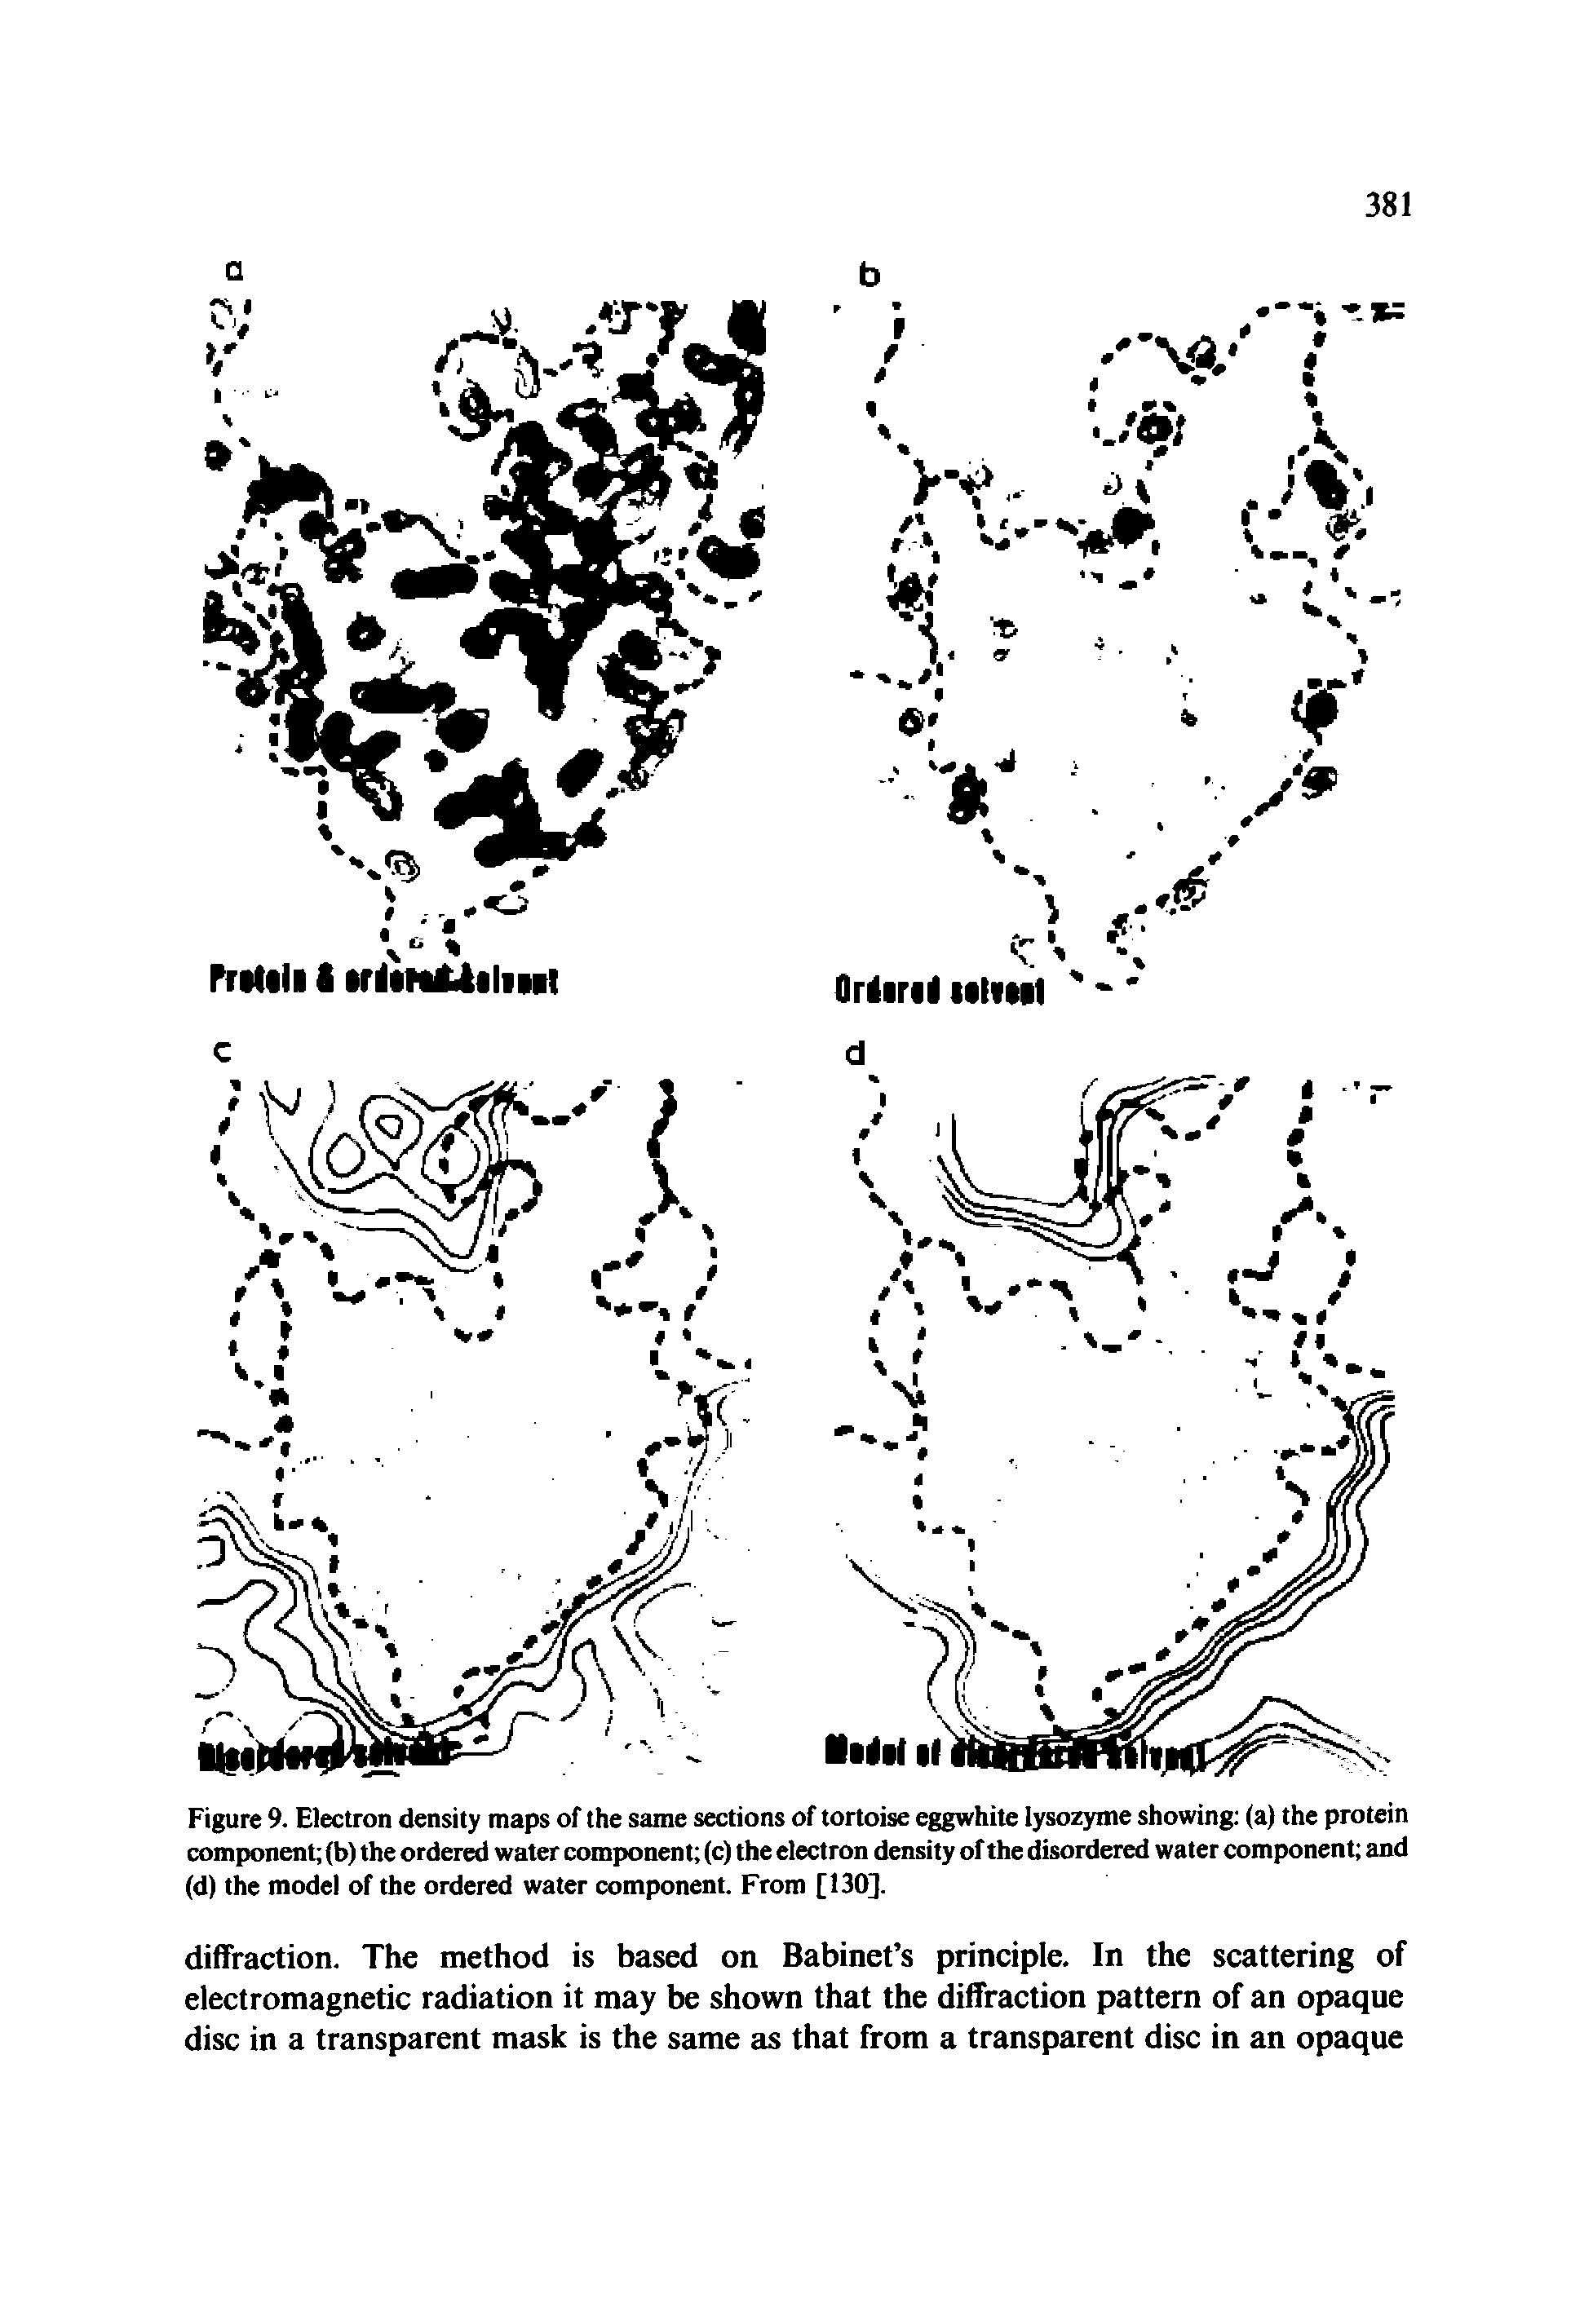 Figure 9. Electron density maps of the same sections of tortoise eggwhite lysozyme showing (a) the protein component (b) the ordered water component (c) the electron density of the disordered water component and (d) the model of the ordered water component. From [130].